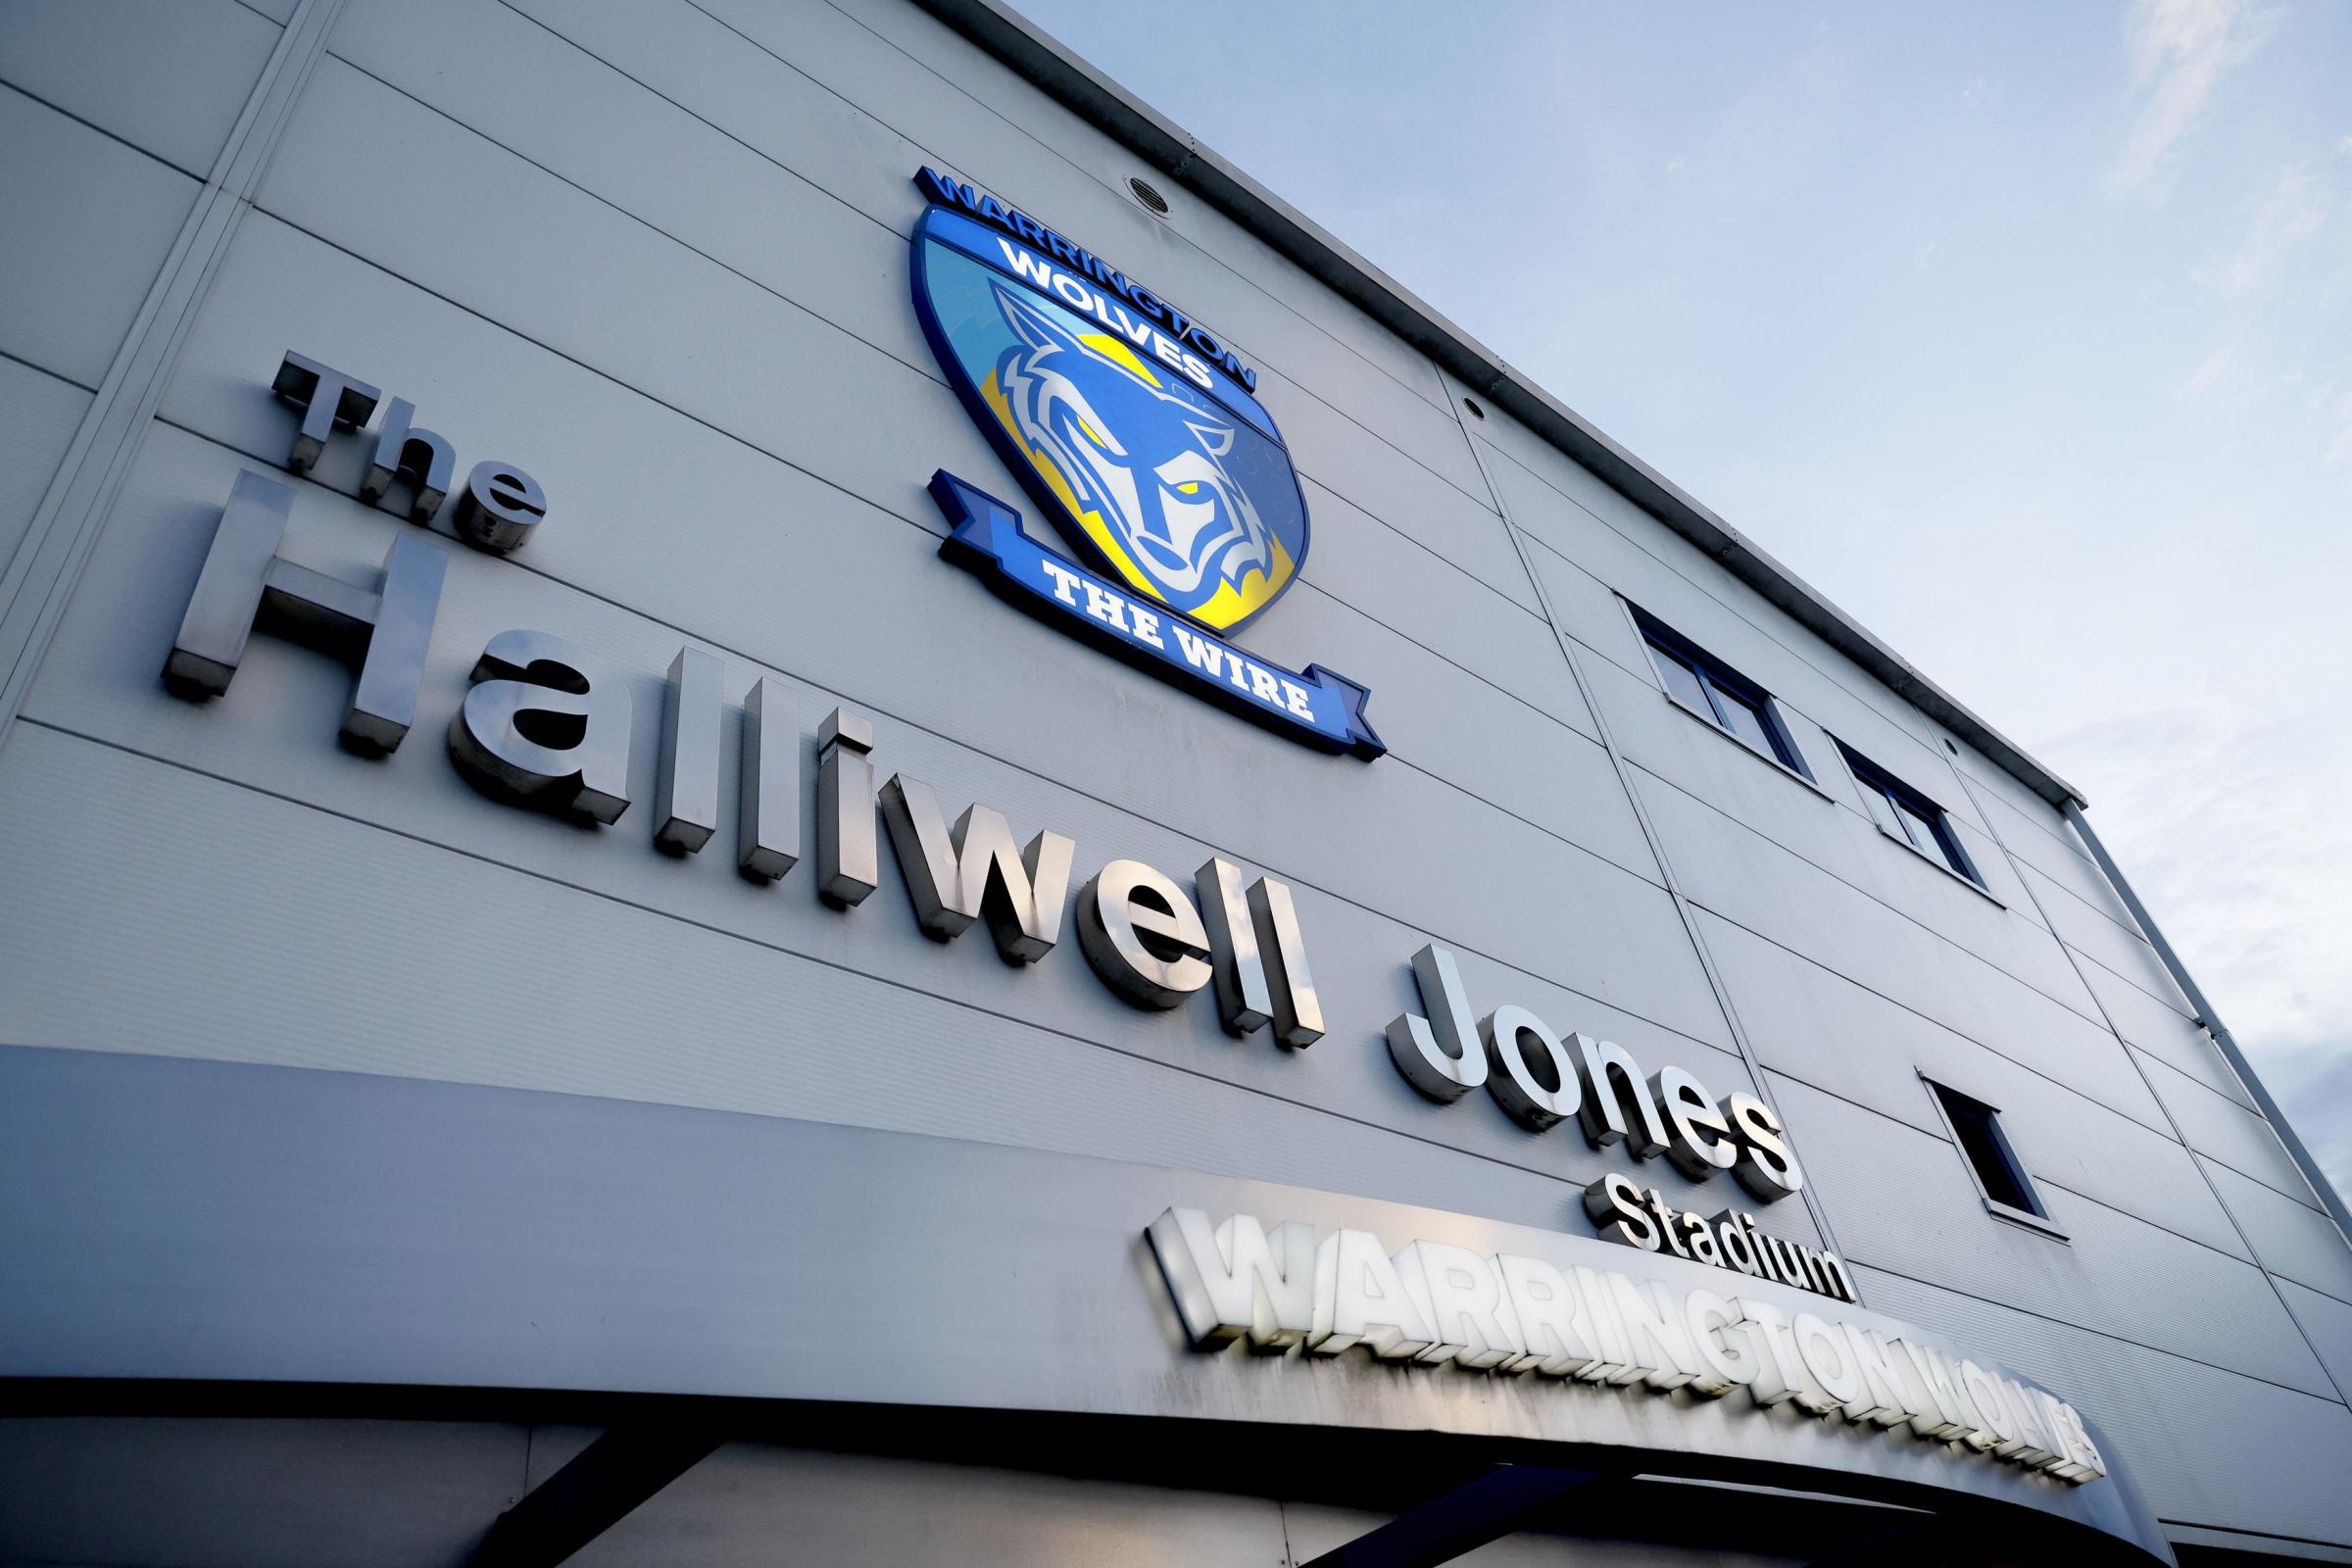 A summit was held at Halliwell Jones Stadium. Picture: PA